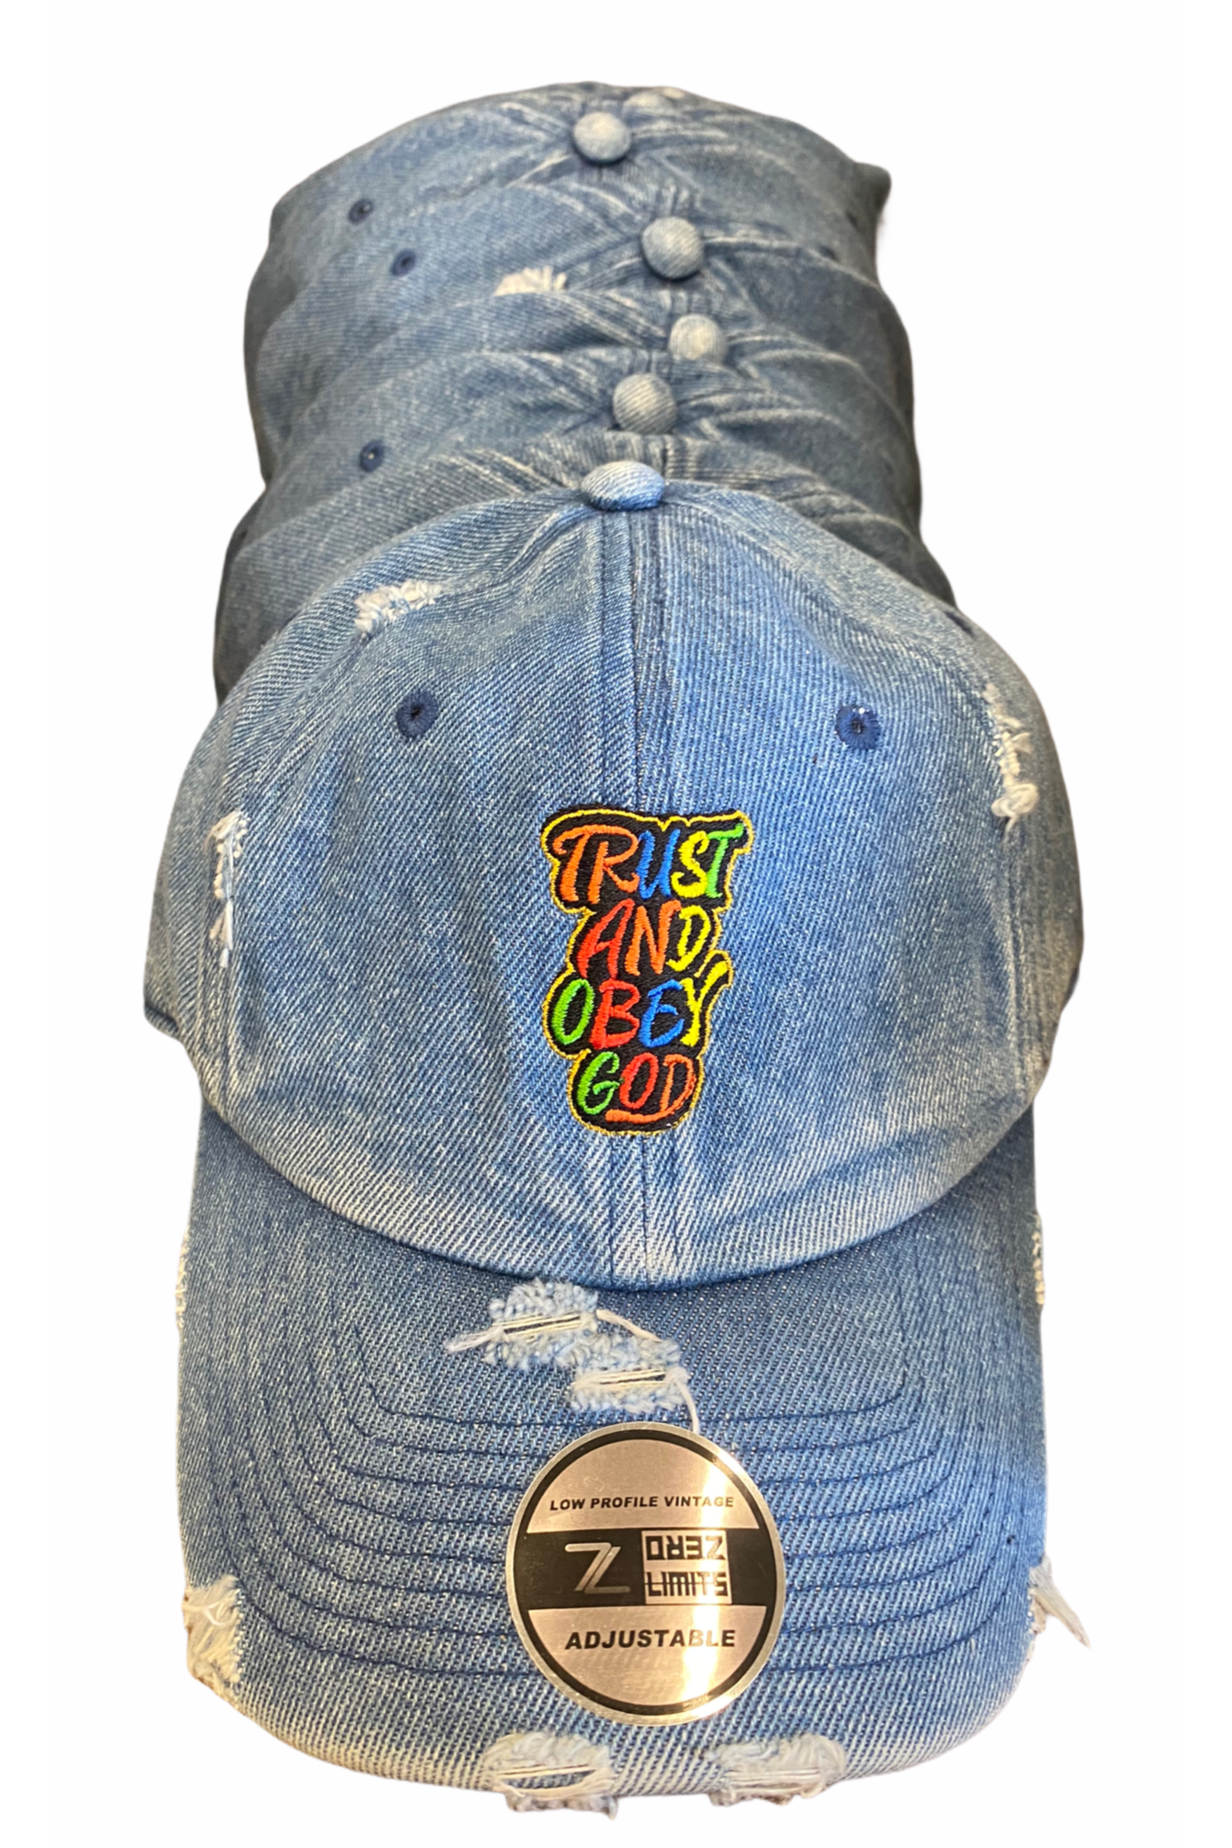 Embroidered on hats, embroidery on hats, custom 